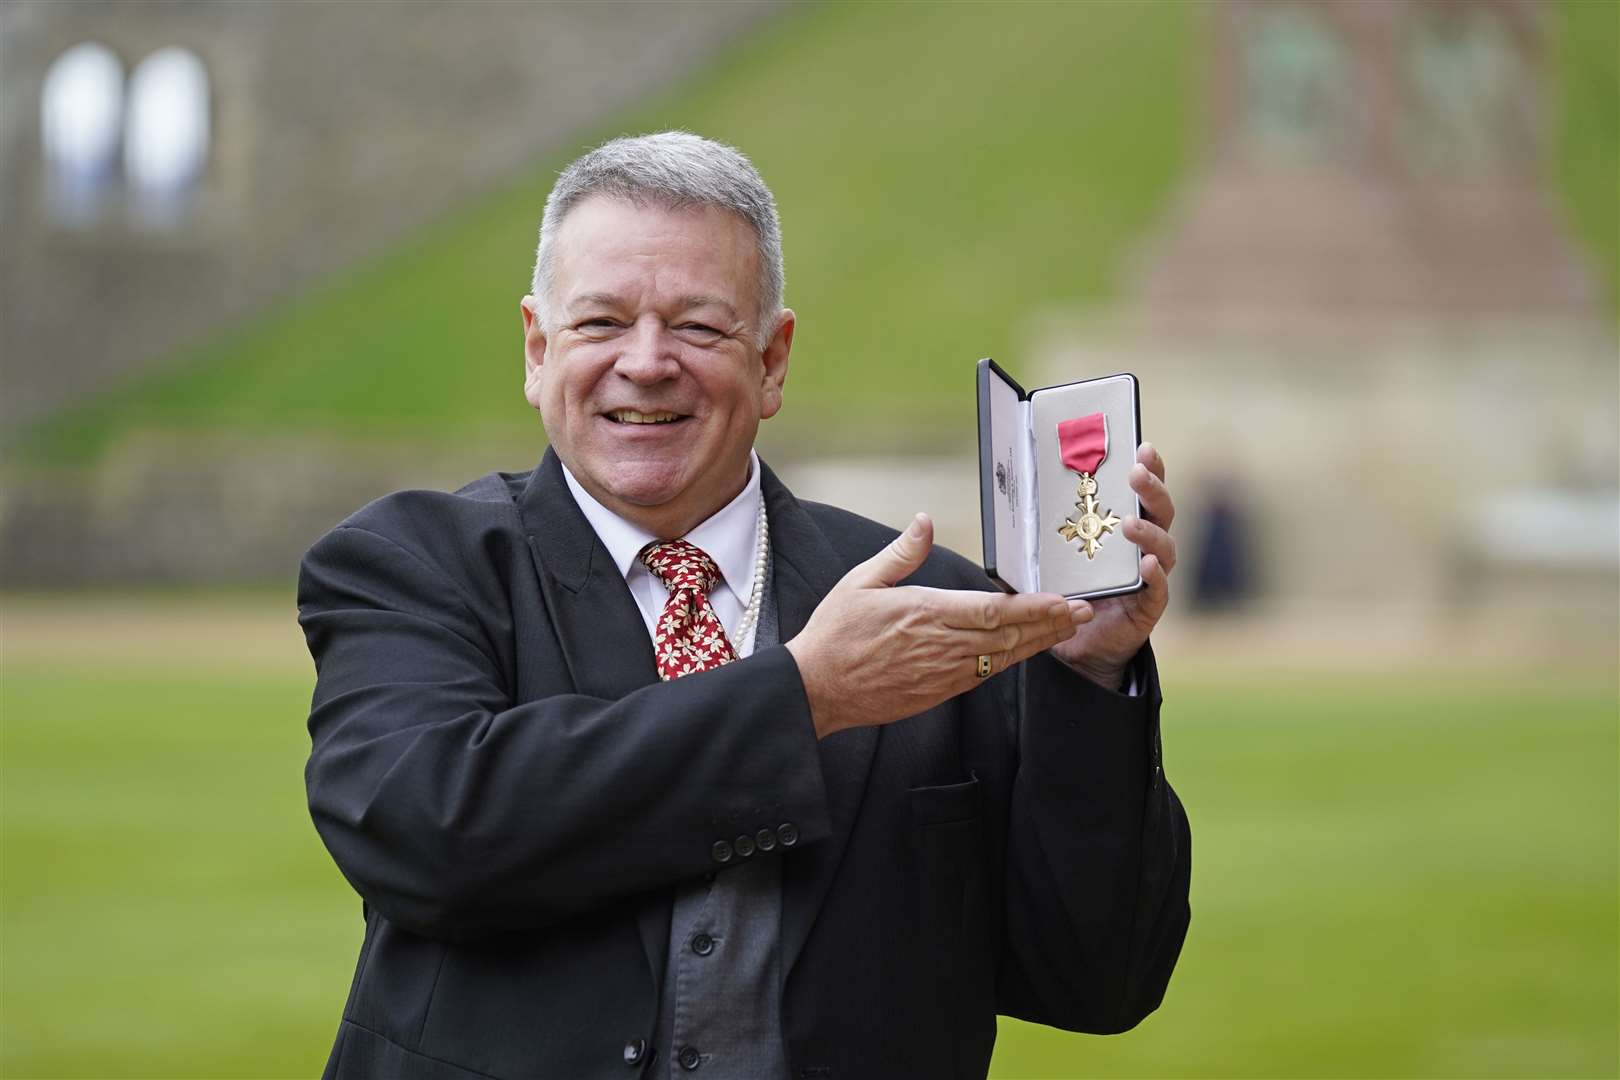 Oboist and conductor Professor Nicholas Daniel after receiving his OBE from the Princess Royal at Windsor Castle (Andrew Matthews/PA).